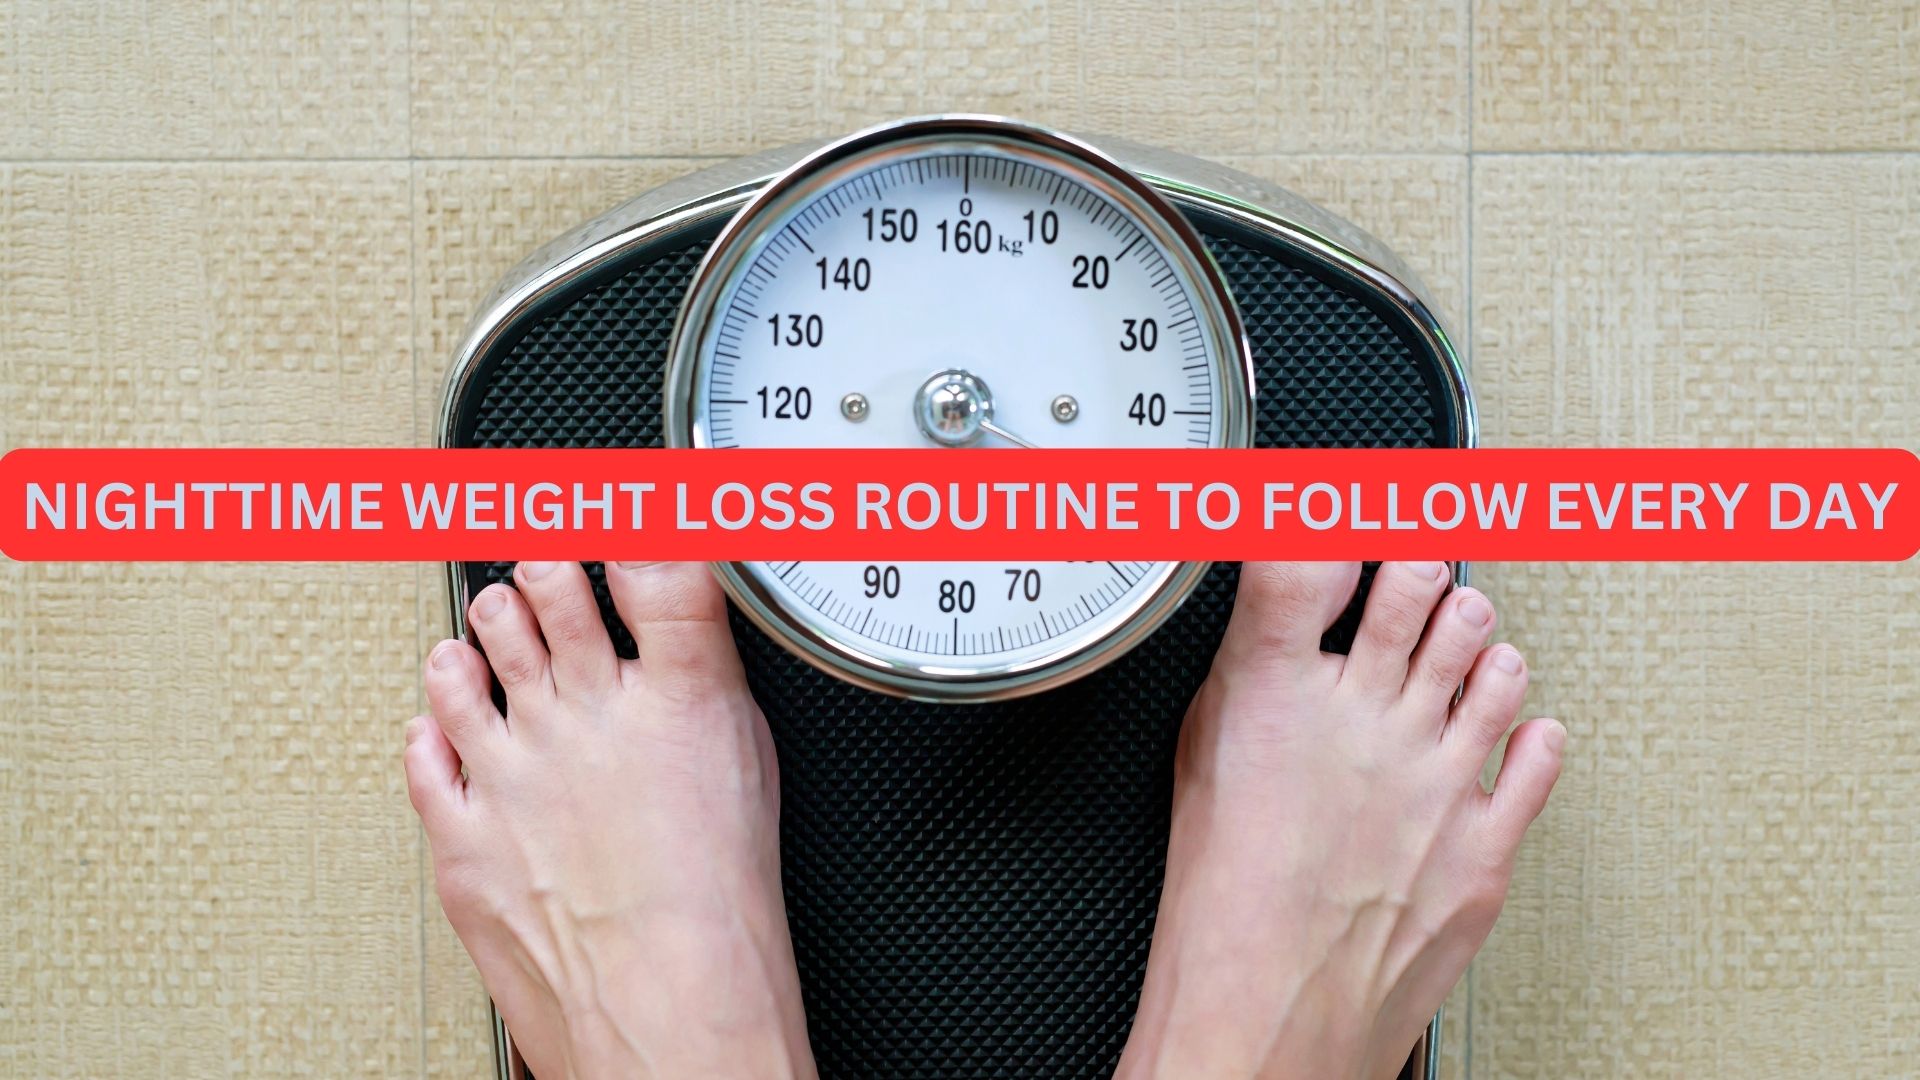 NIGHTTIME WEIGHT LOSS ROUTINE TO FOLLOW EVERY DAY